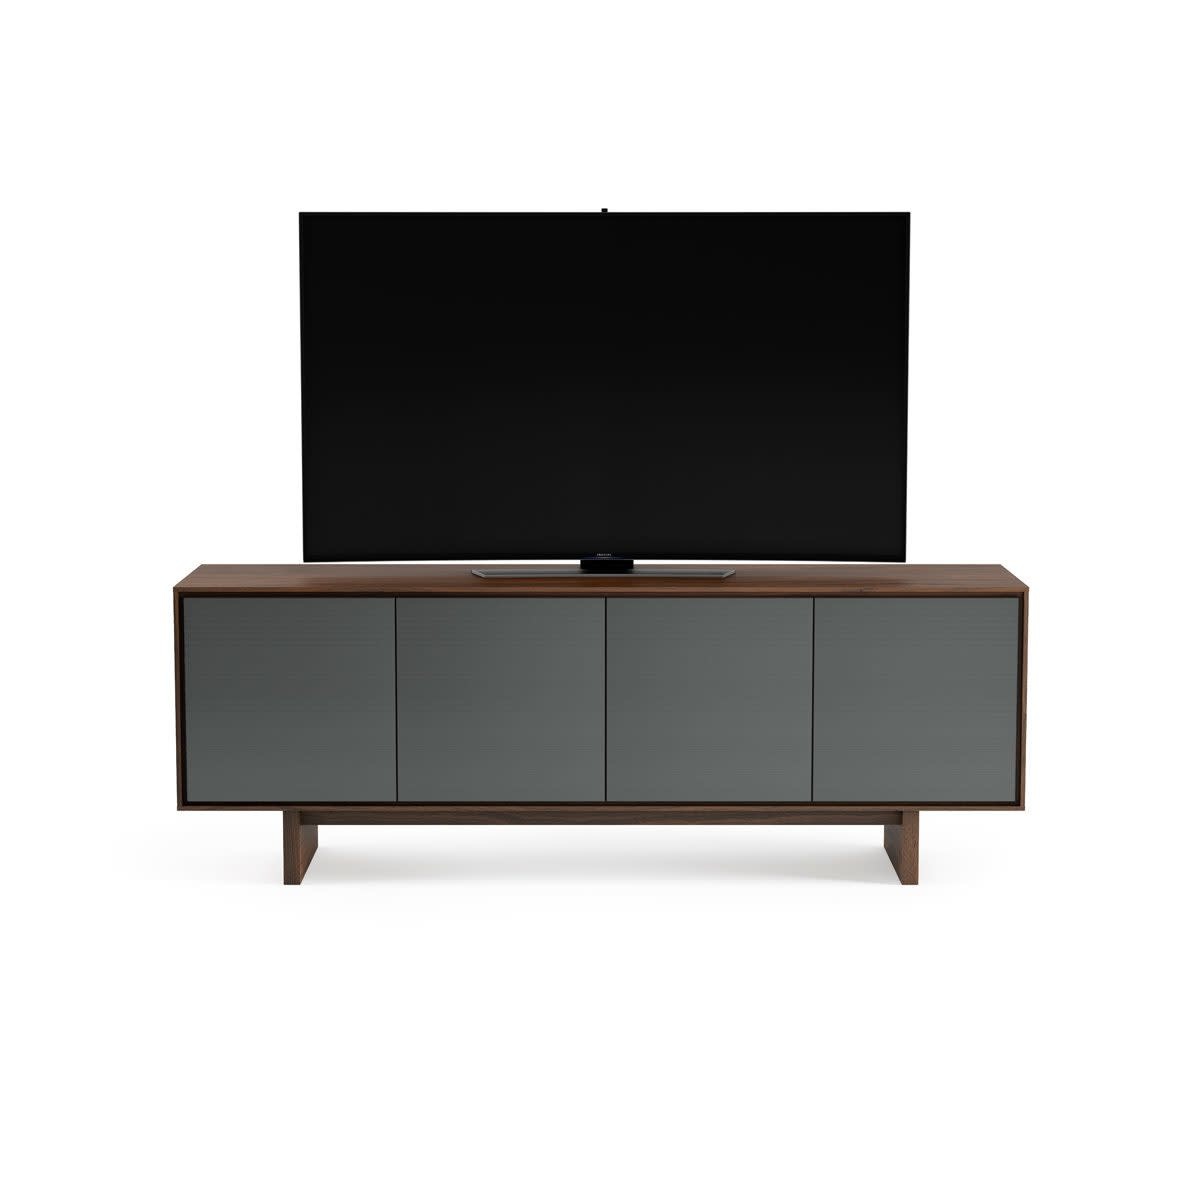 BDI Octave 8379 Four Component-wide Media Cabinet ( up to 85" TV )